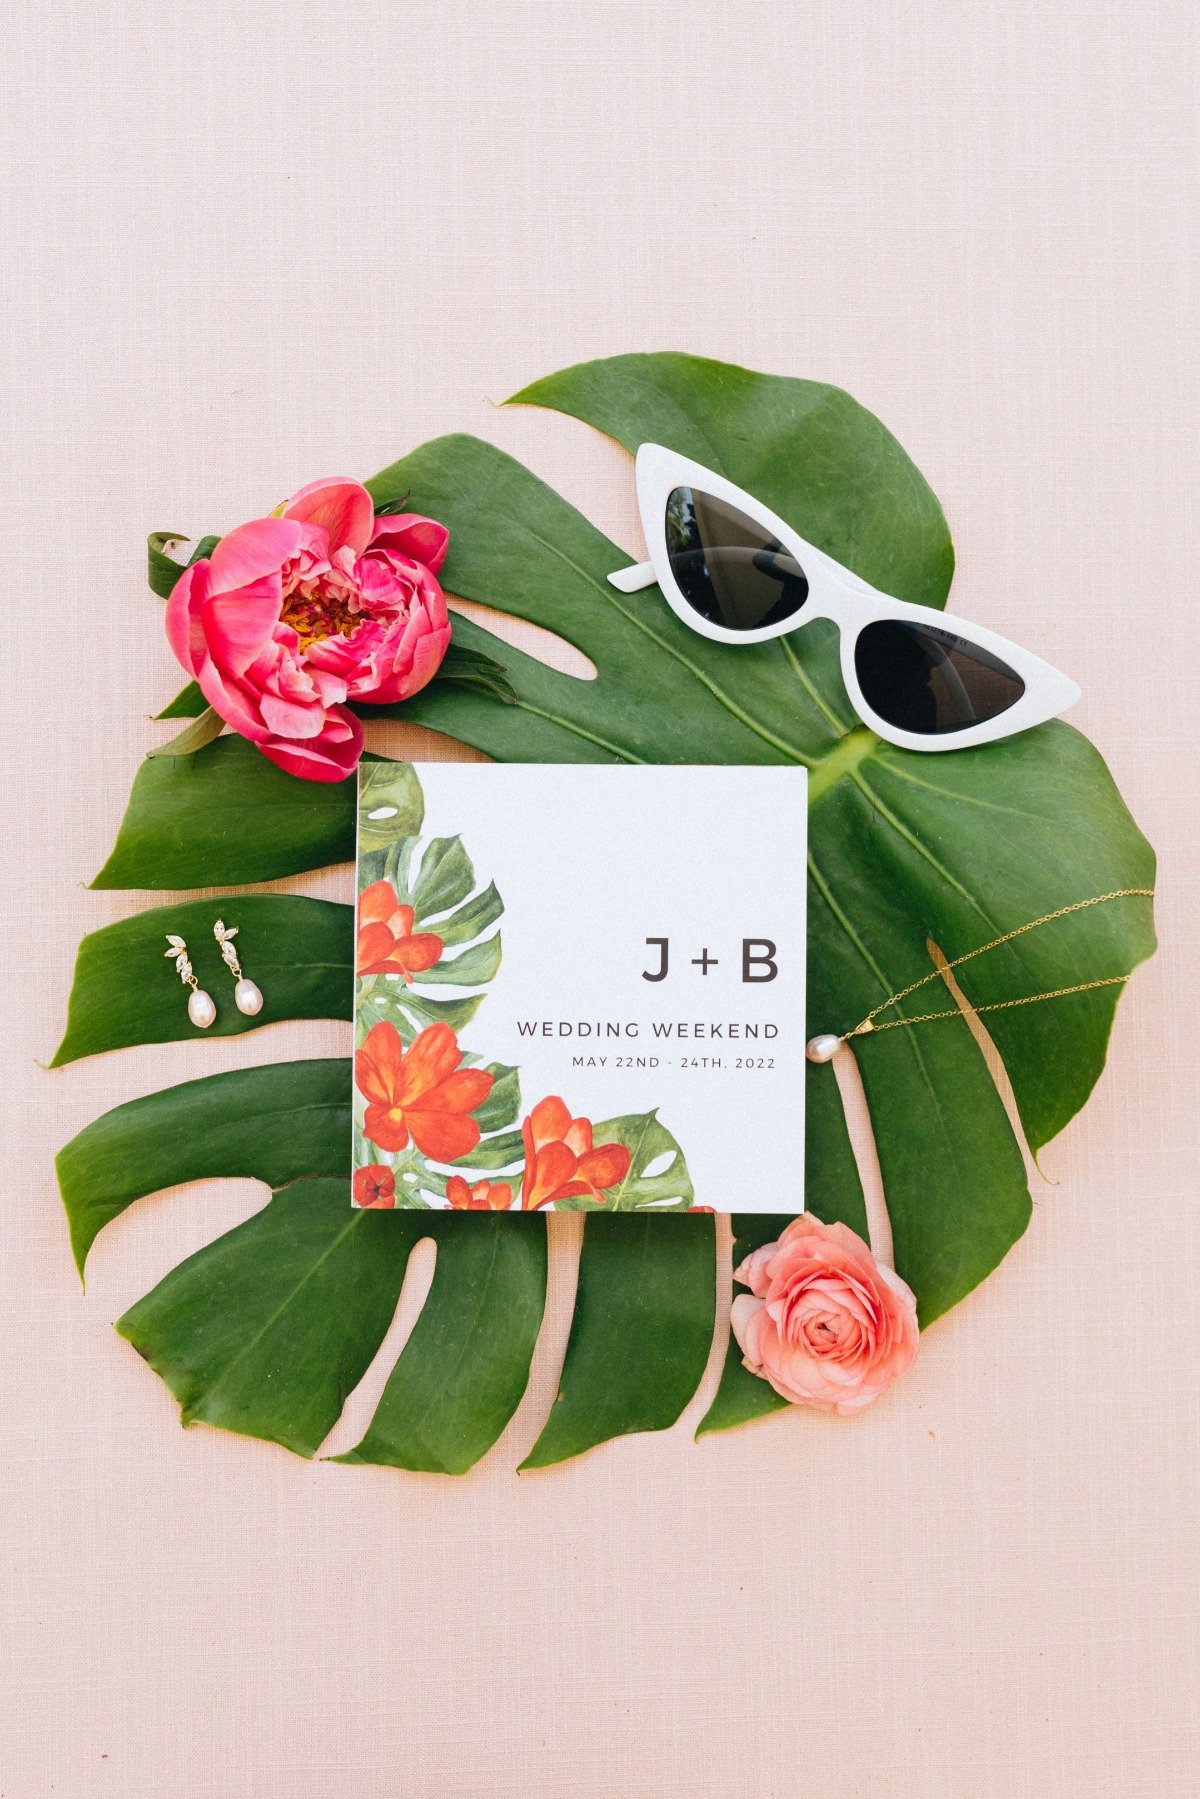 Invitation, tropical flowers, sunglasses, and earrings